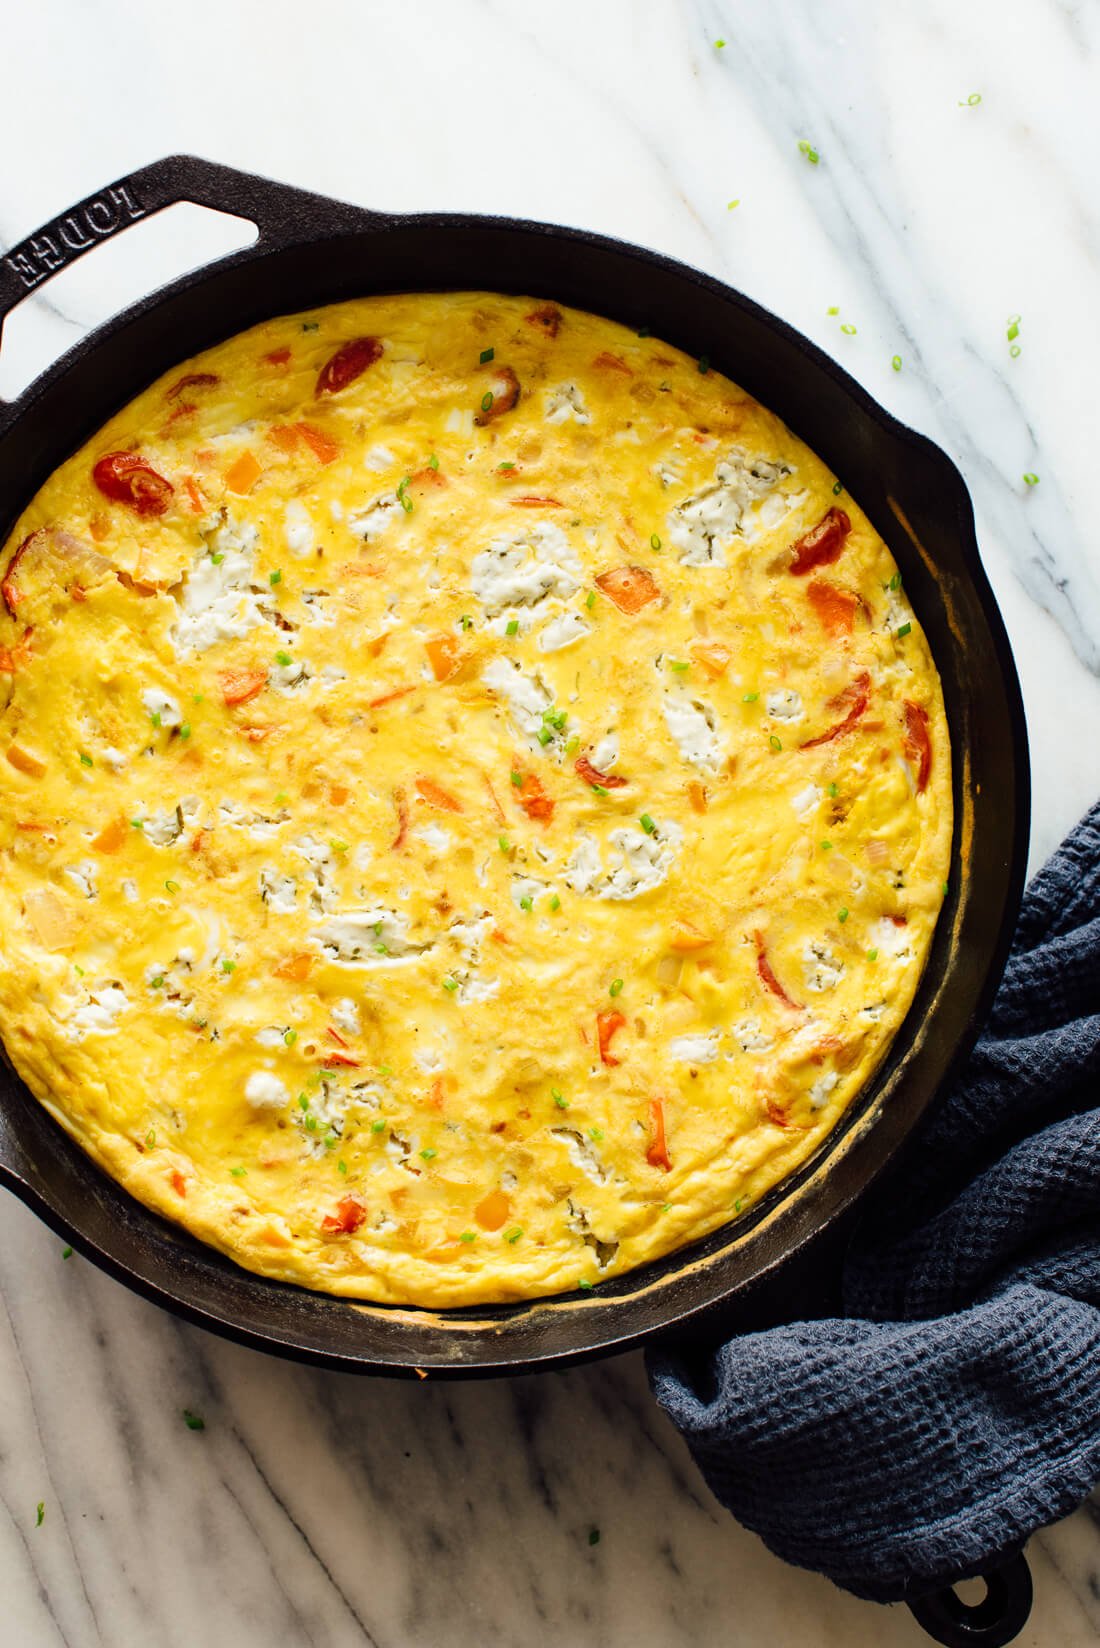 https://cookieandkate.com/images/2018/05/traditional-stovetop-frittata-recipe-4.jpg Recipe